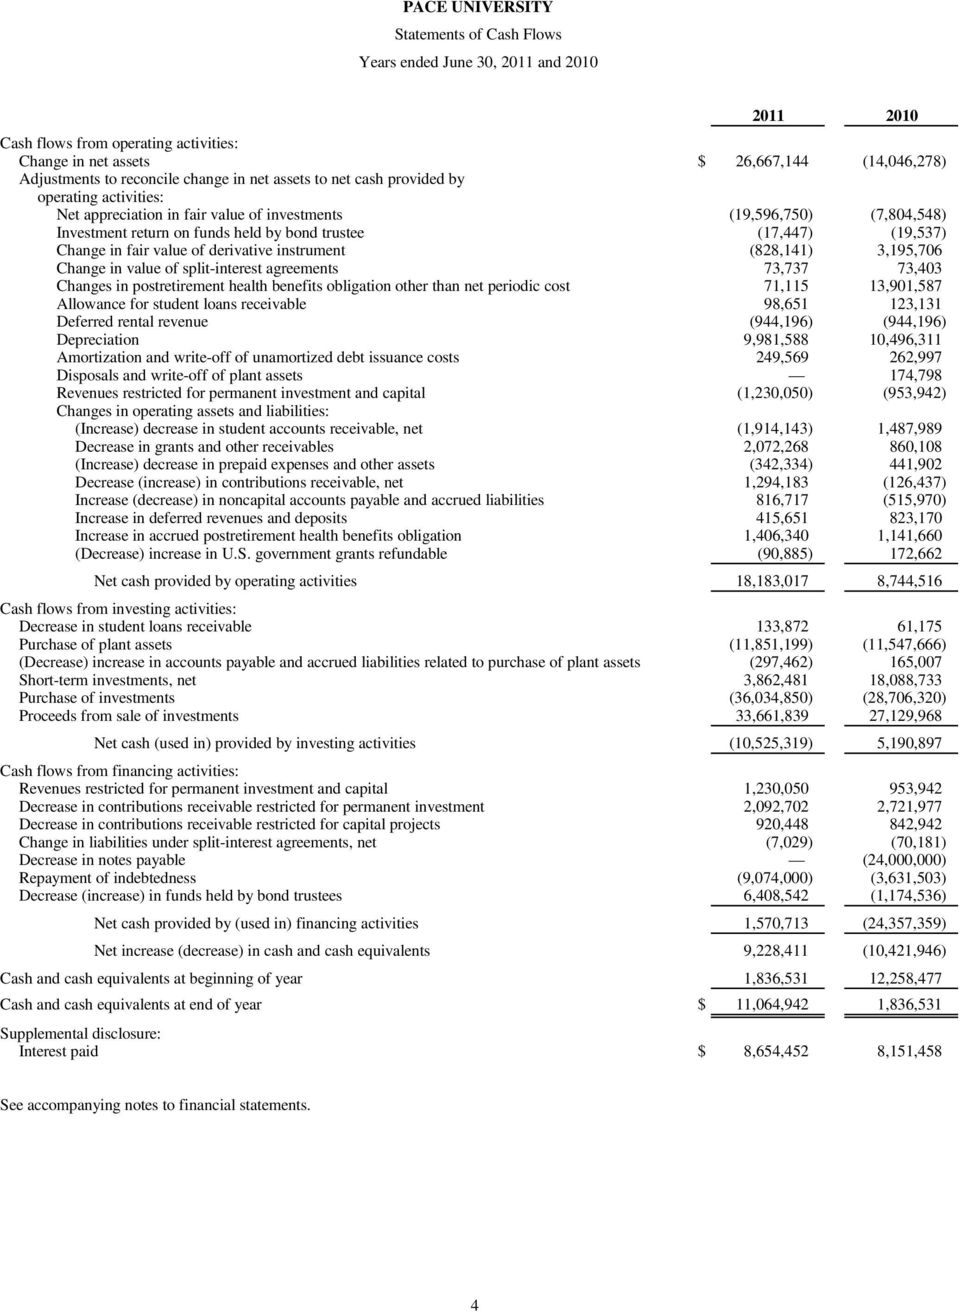 instrument (828,141) 3,195,706 Change in value of split-interest agreements 73,737 73,403 Changes in postretirement health benefits obligation other than net periodic cost 71,115 13,901,587 Allowance